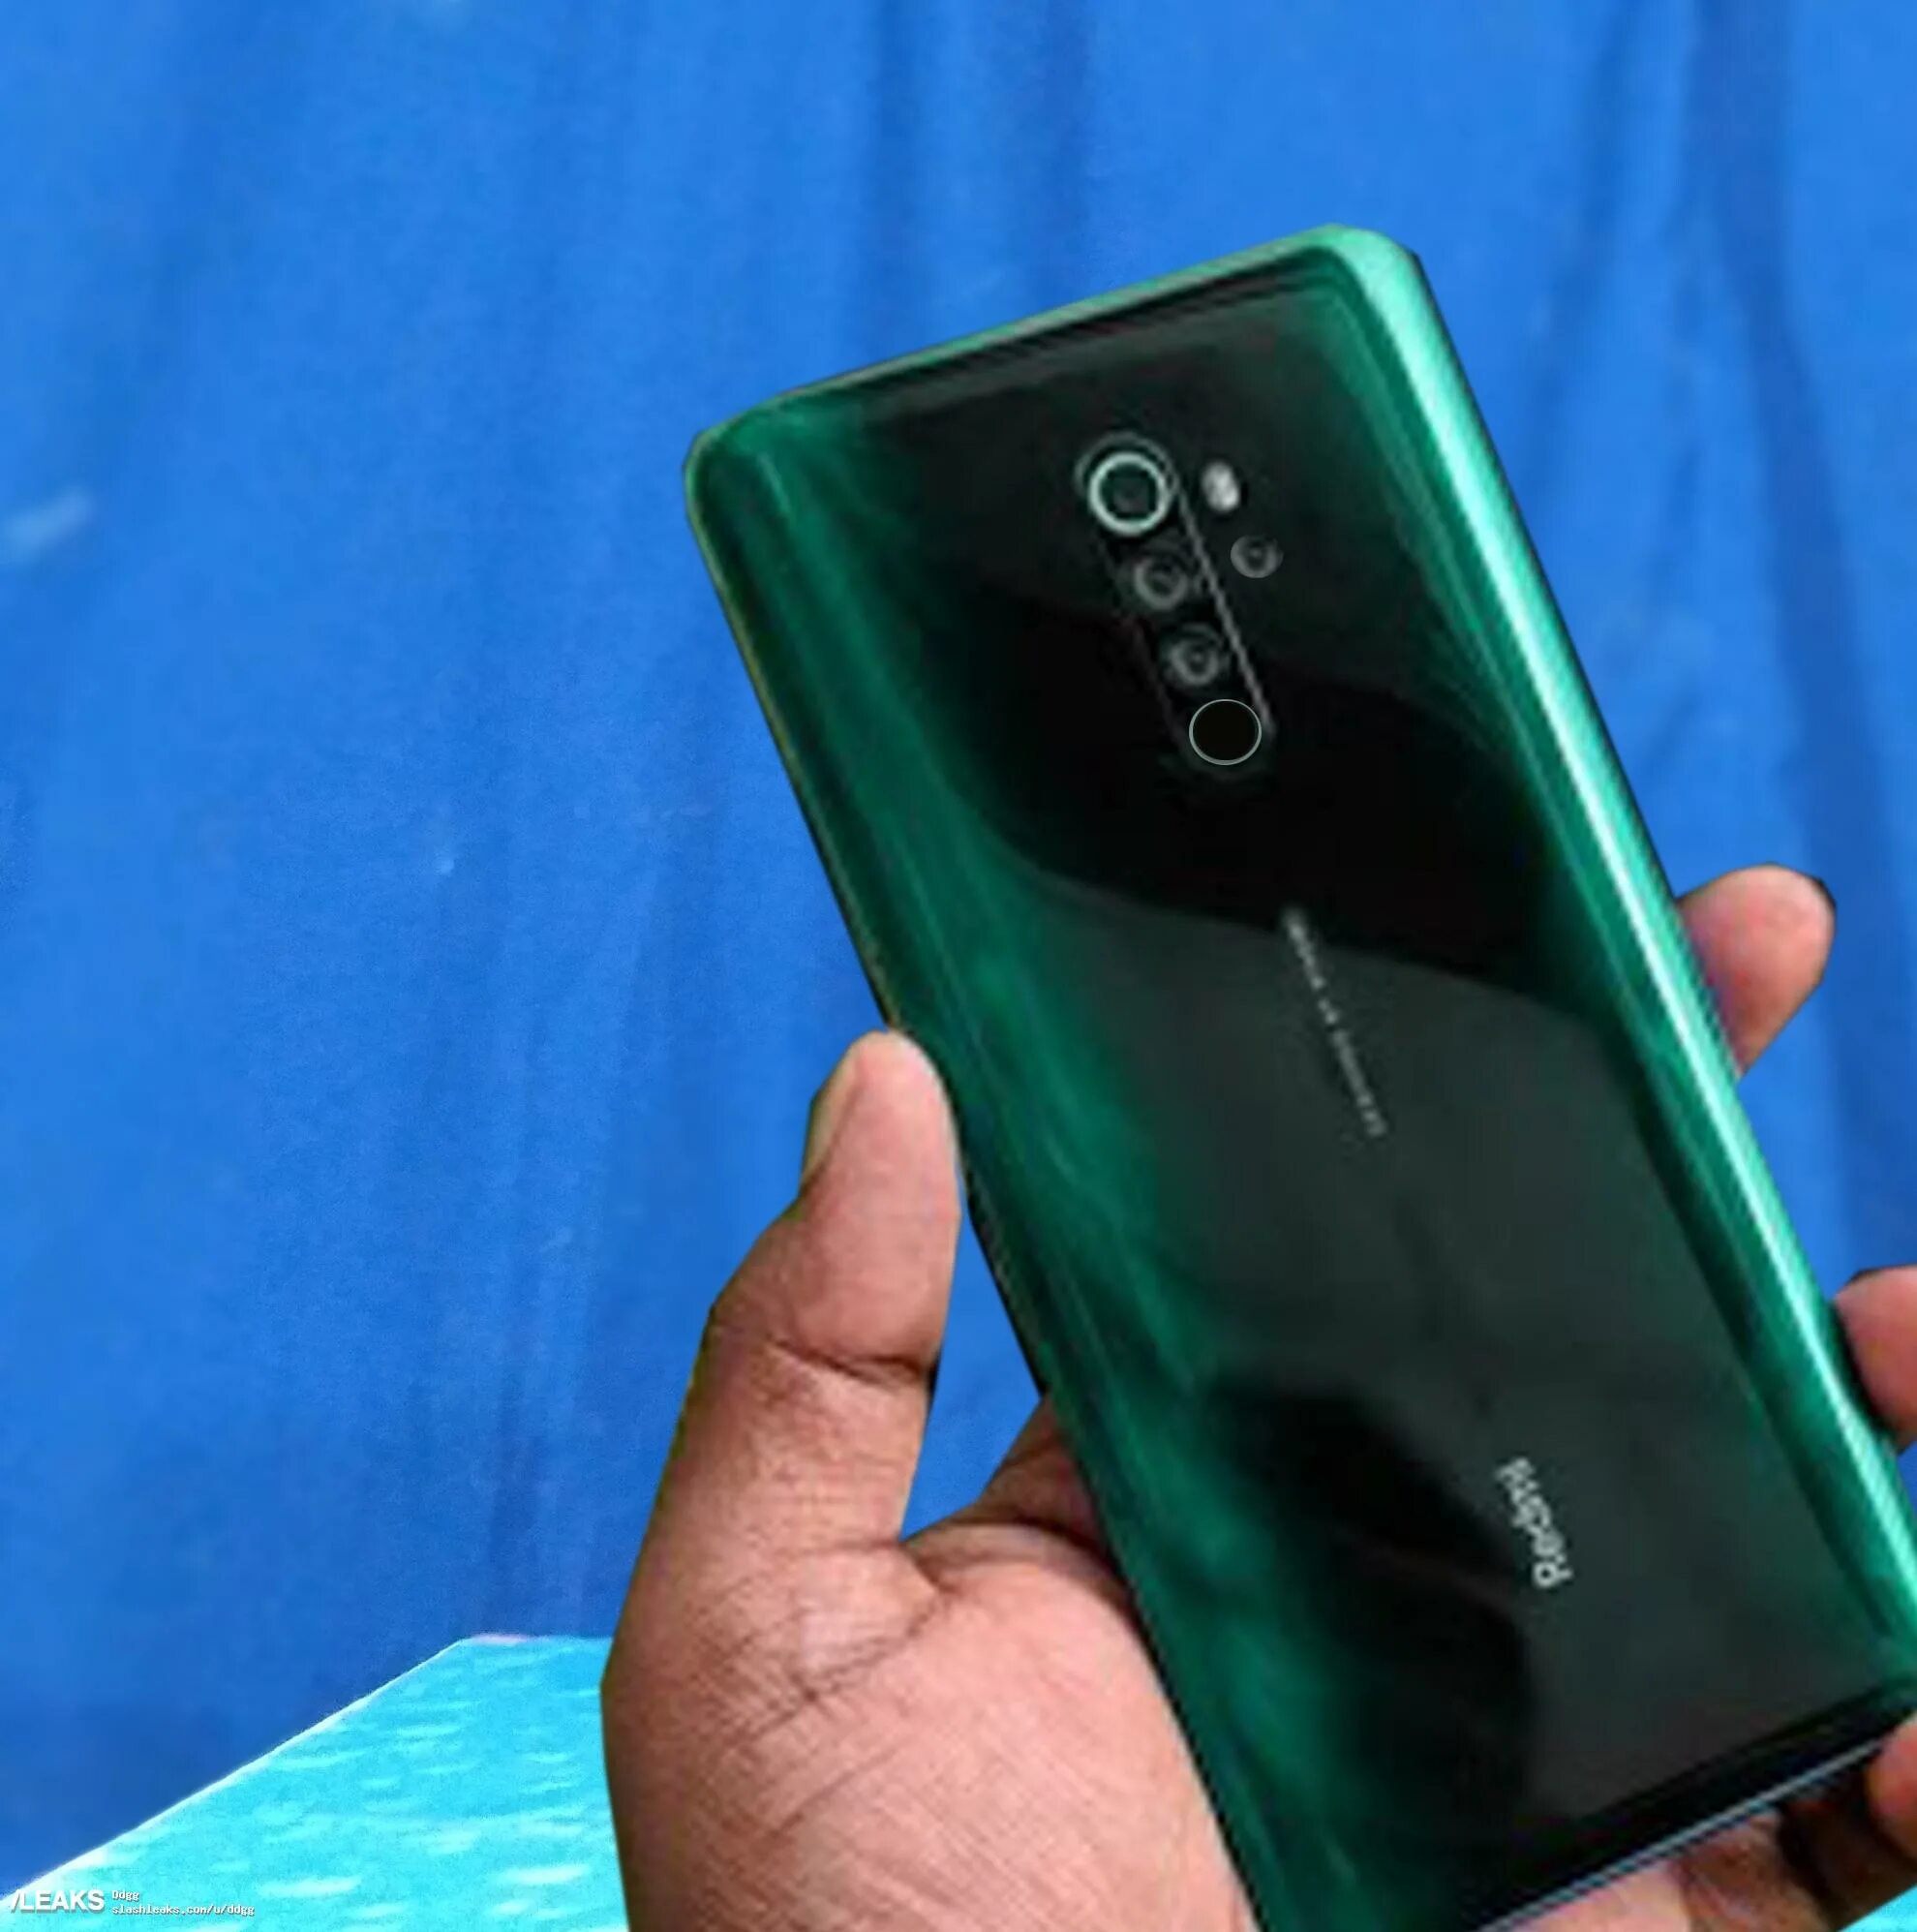 Redmi Note 8 Pro. Xiaomi Redmi Note 8 Pro. Xiaomi Redmi Note 8 Pro Green. Xiaomi Redmi Note 8 Pro 6/128gb. Redmi note 13 pro green